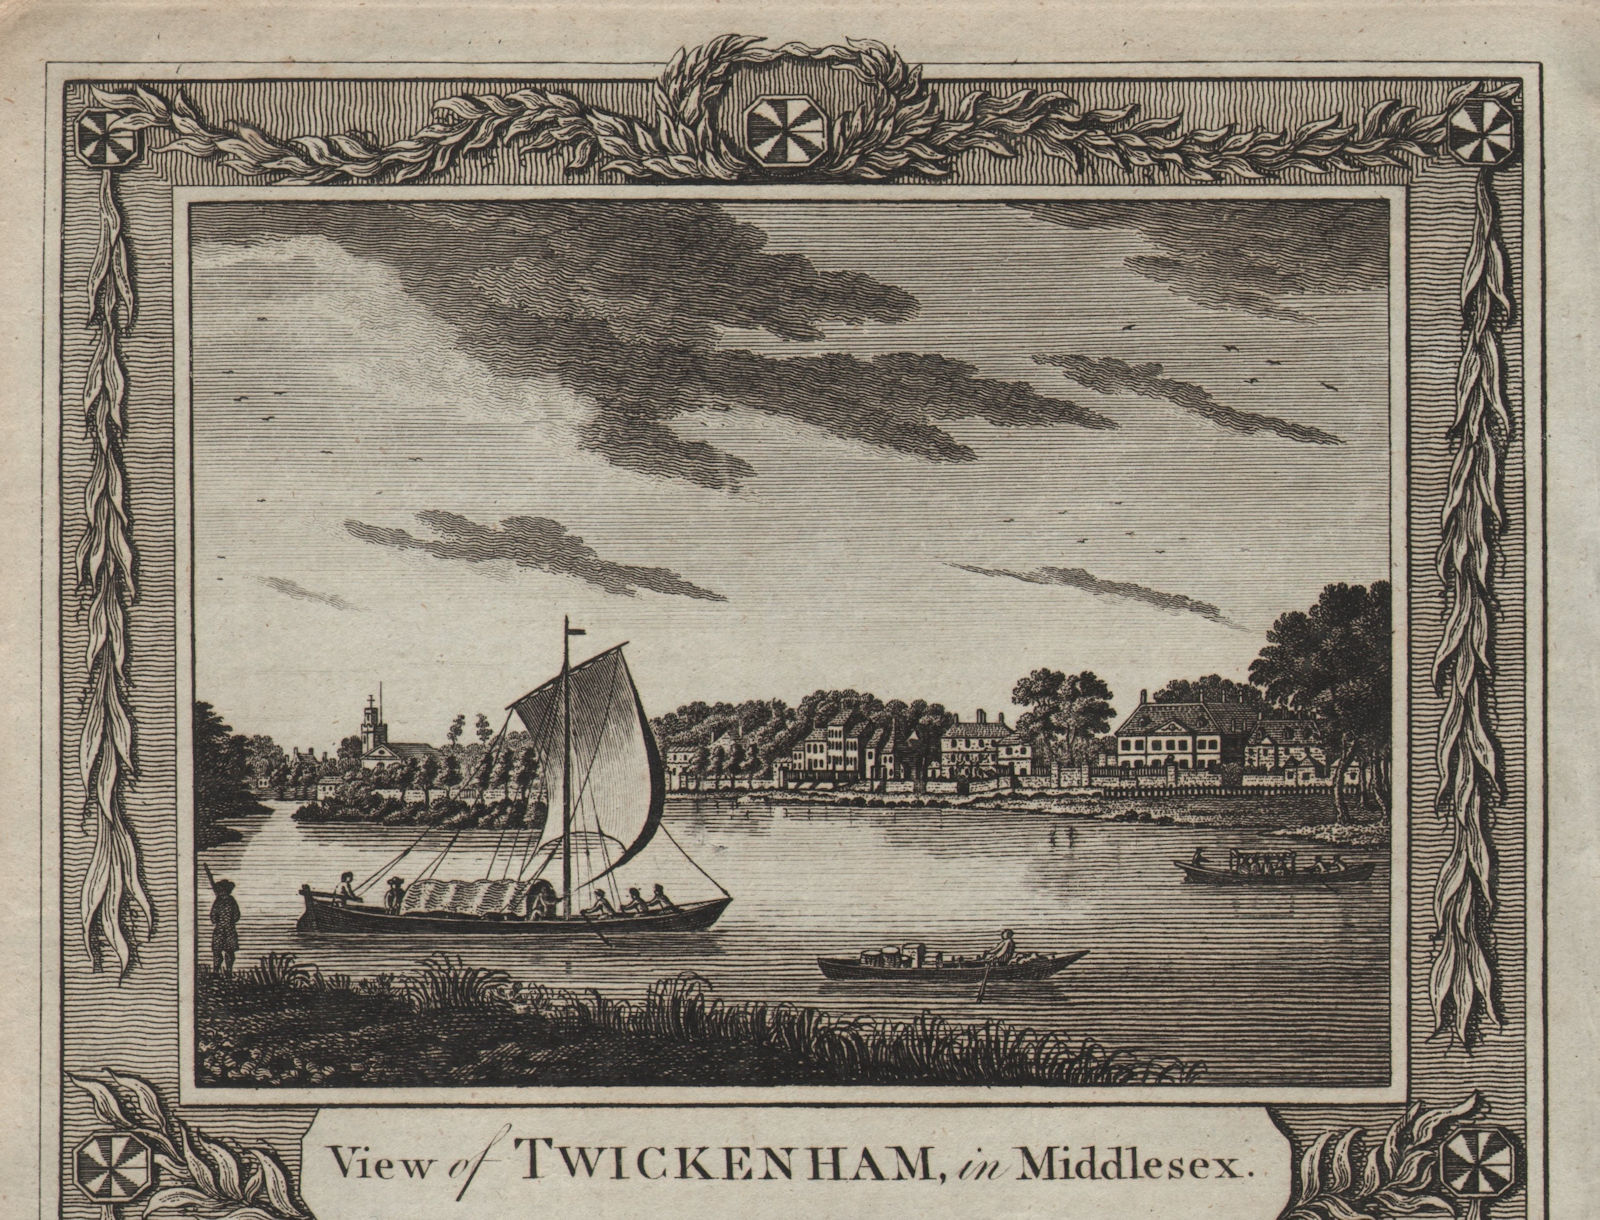 View of Twickenham from the river. St Mary's Church. London. THORNTON 1784